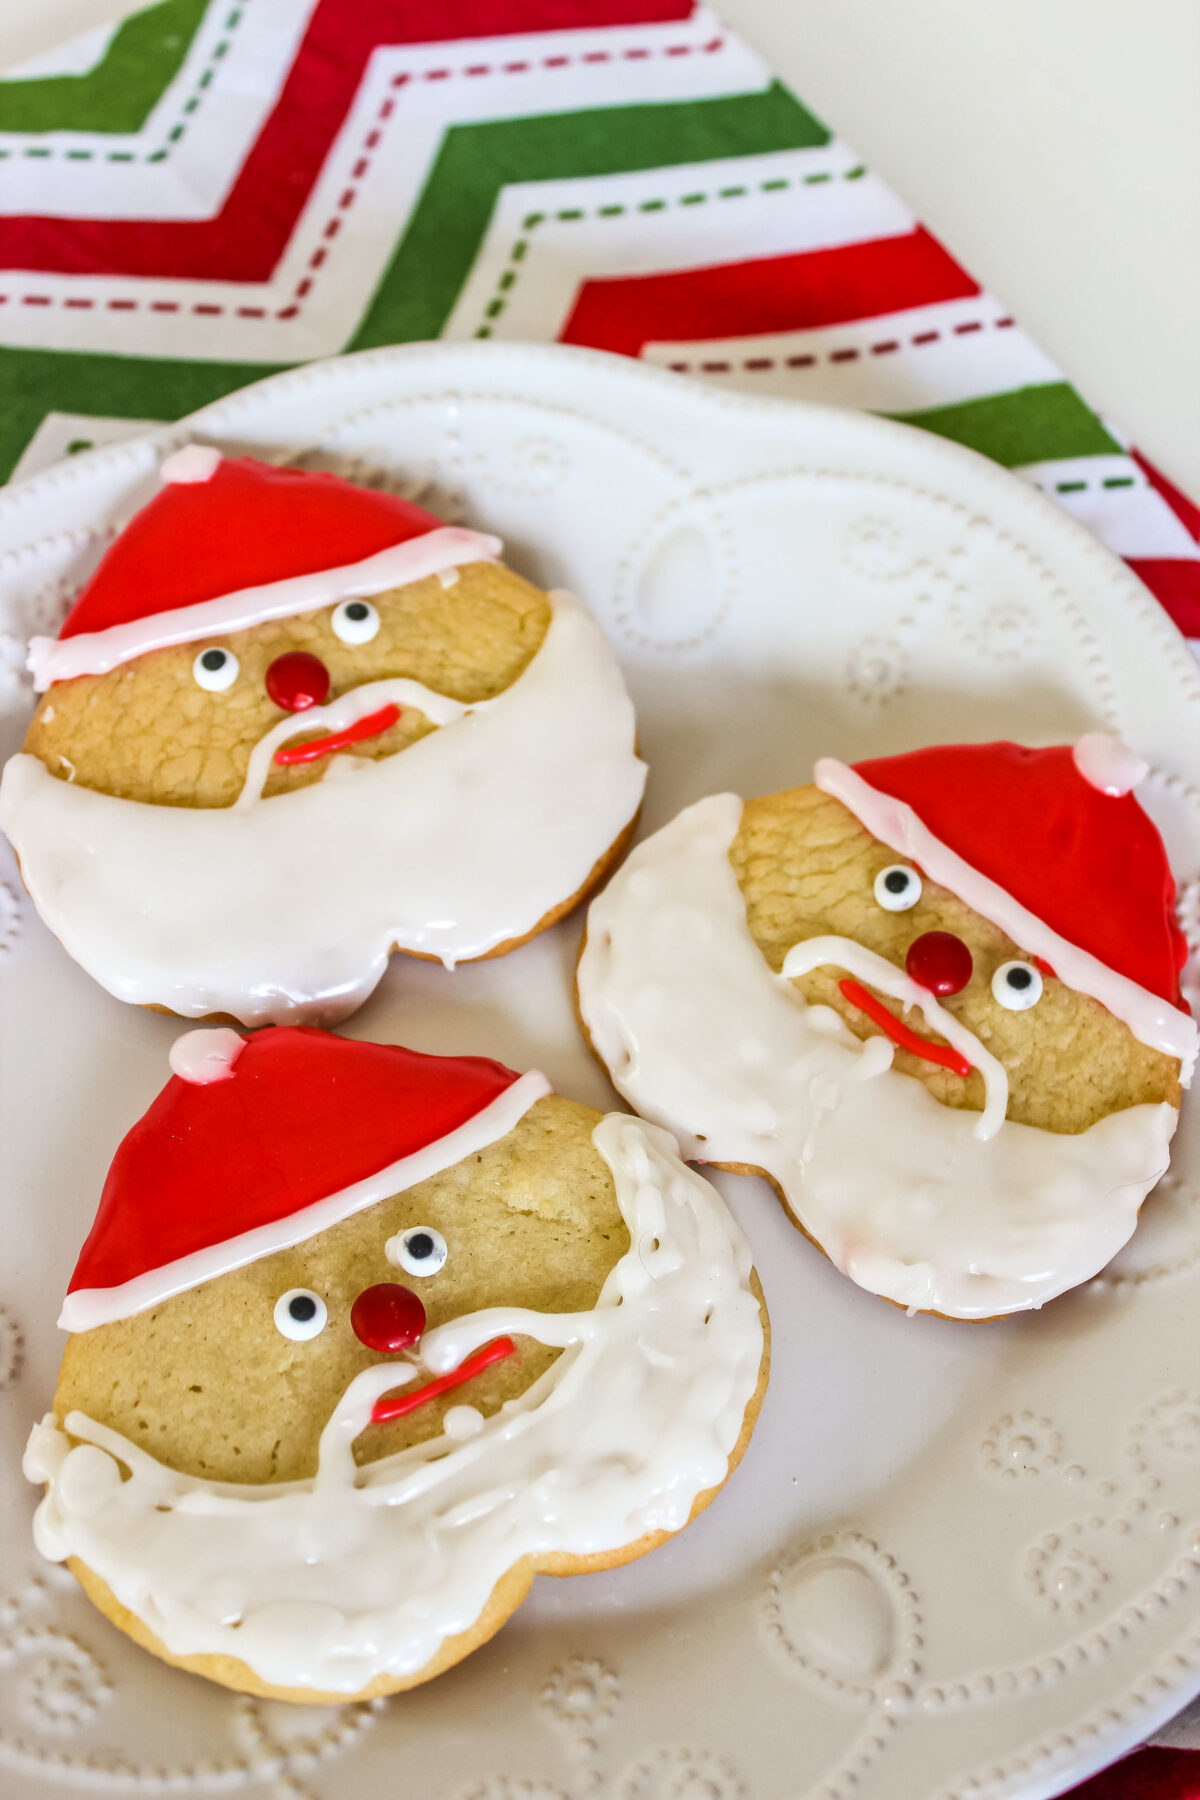 These Santa Sugar Cookies are deceptively easy to put together and look fabulous on your Christmas Cookie Plate!